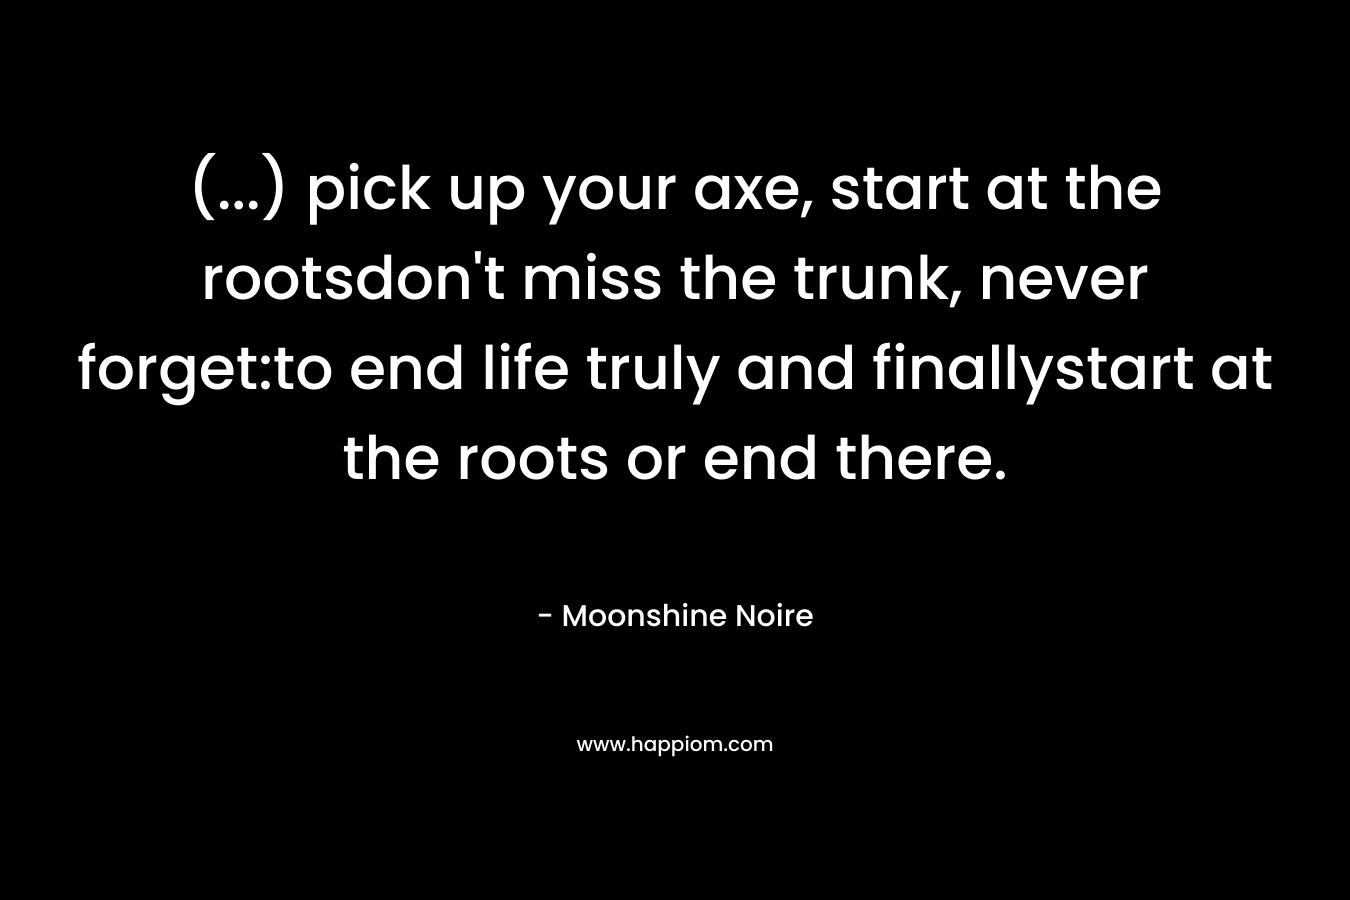 (...) pick up your axe, start at the rootsdon't miss the trunk, never forget:to end life truly and finallystart at the roots or end there.